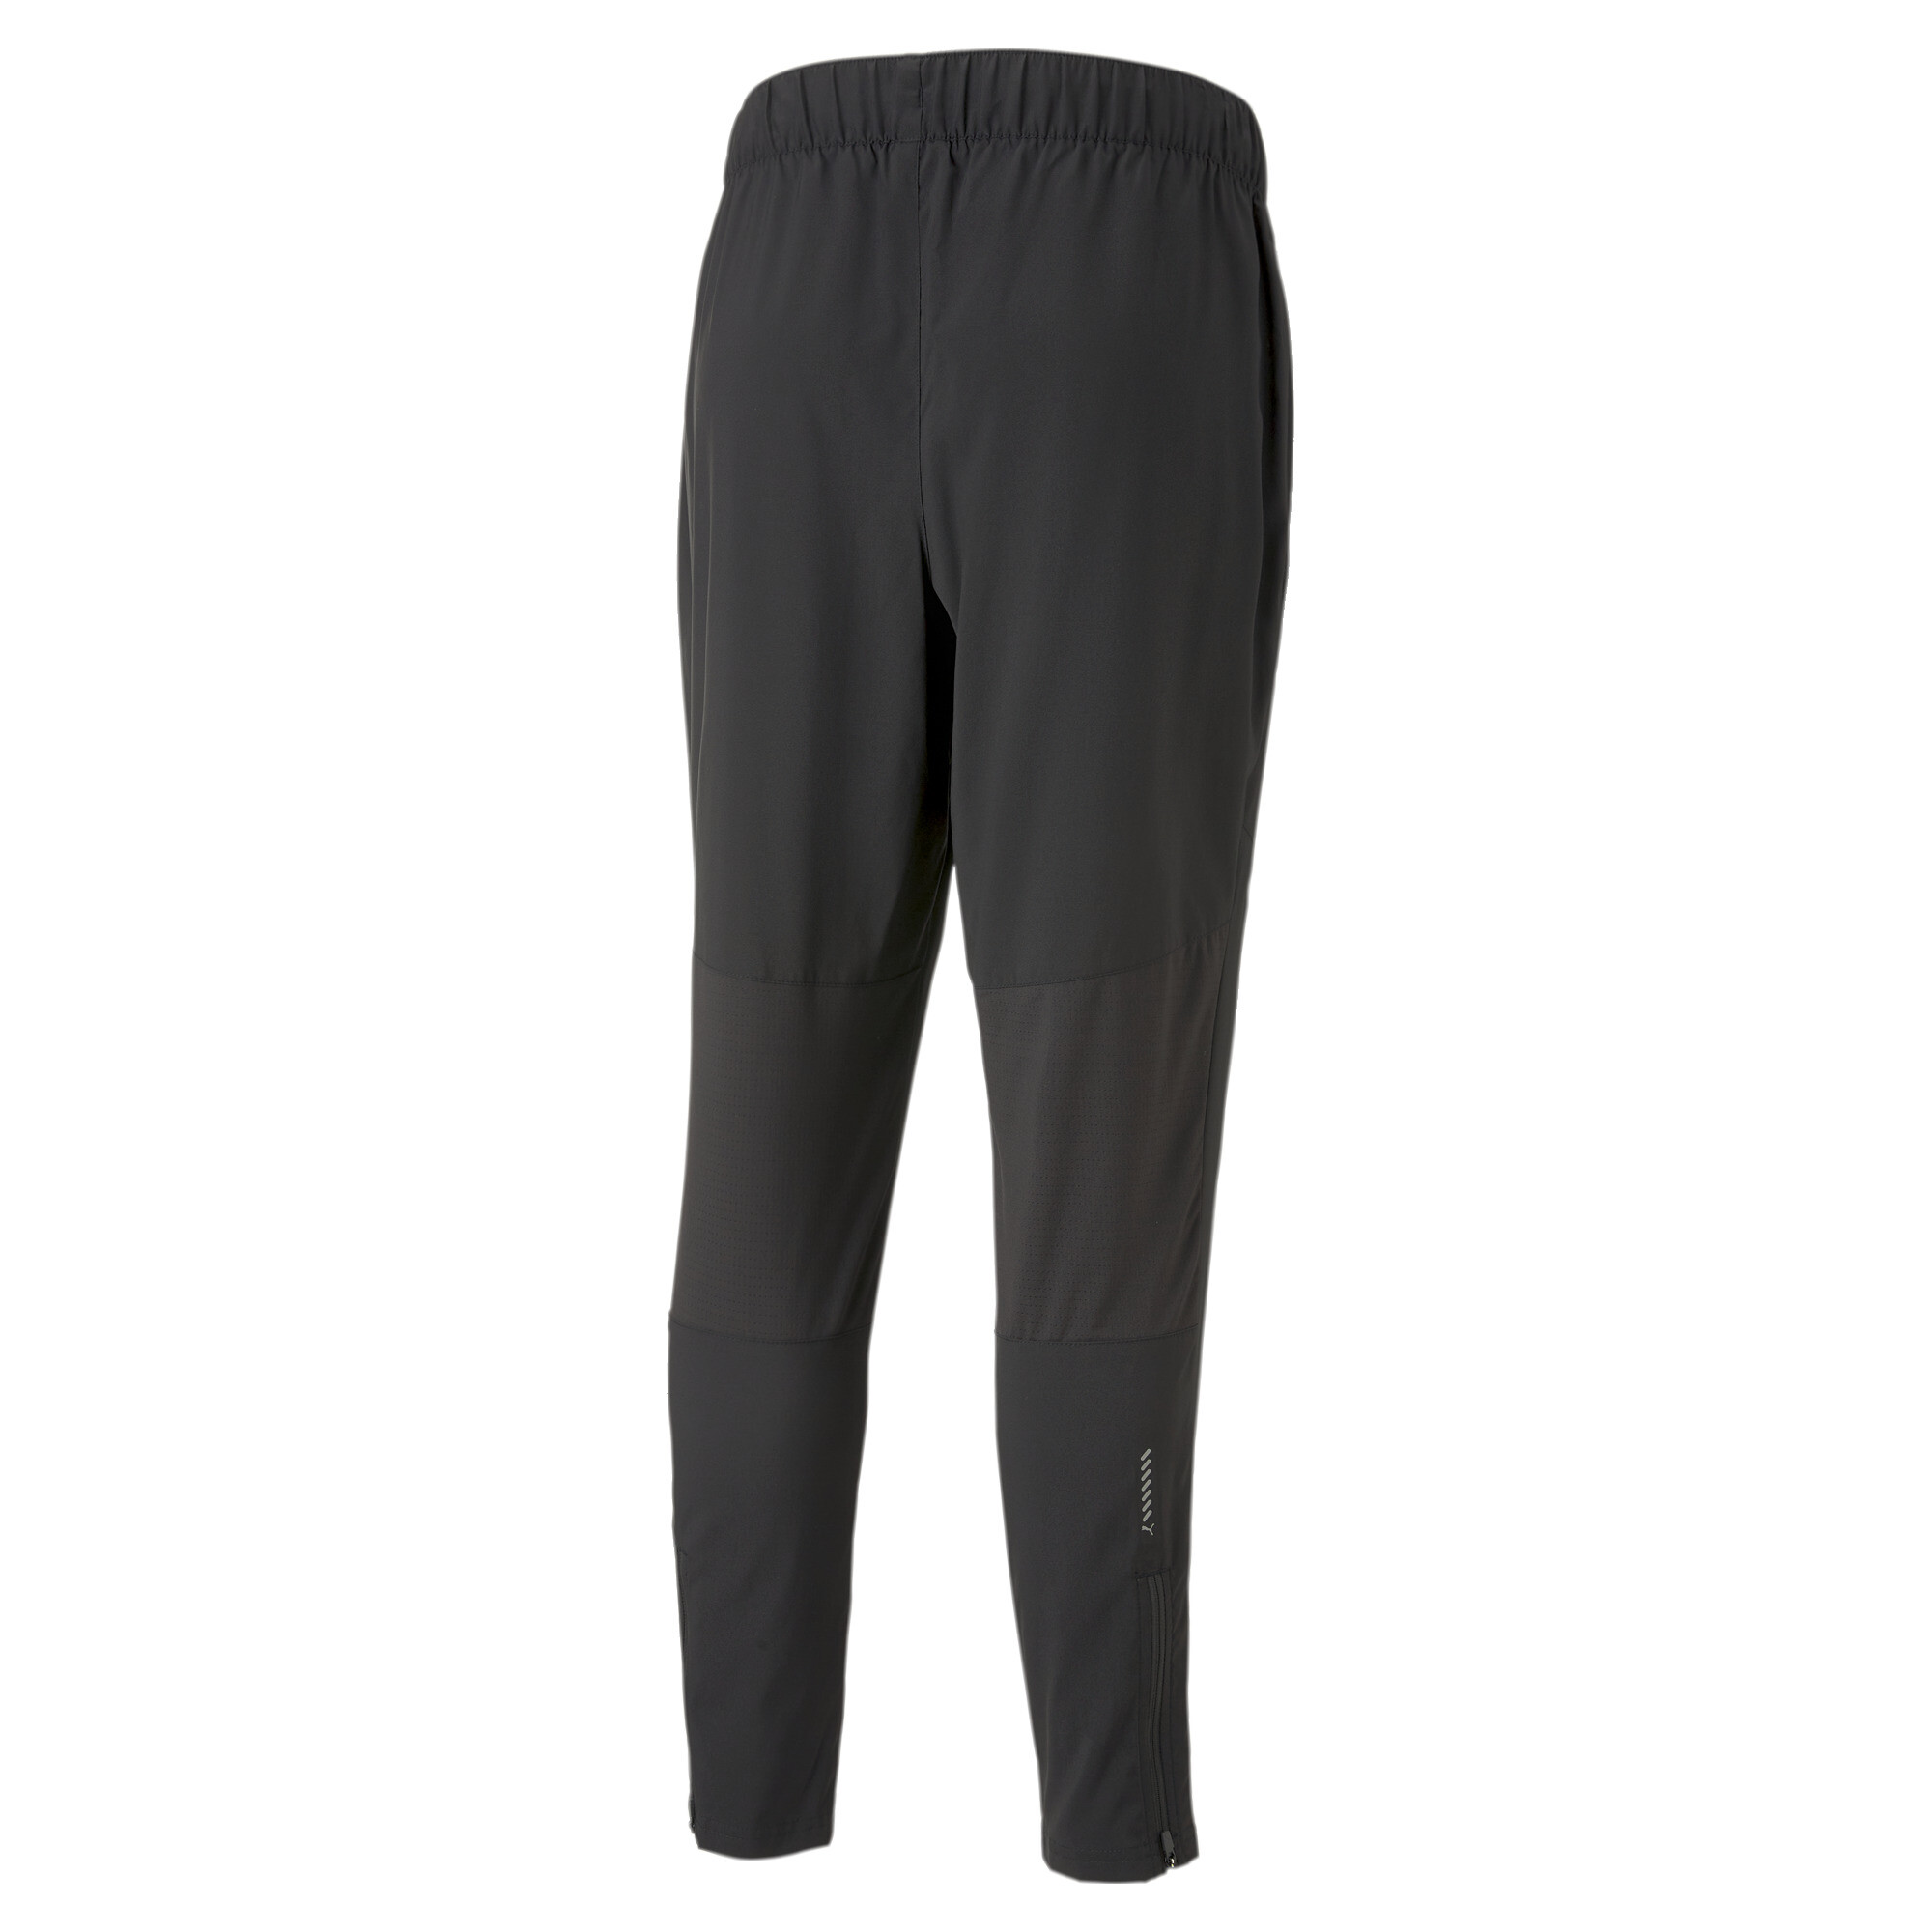 Men's PUMA RUN Tapered Woven Running Pants Men In Black, Size Small